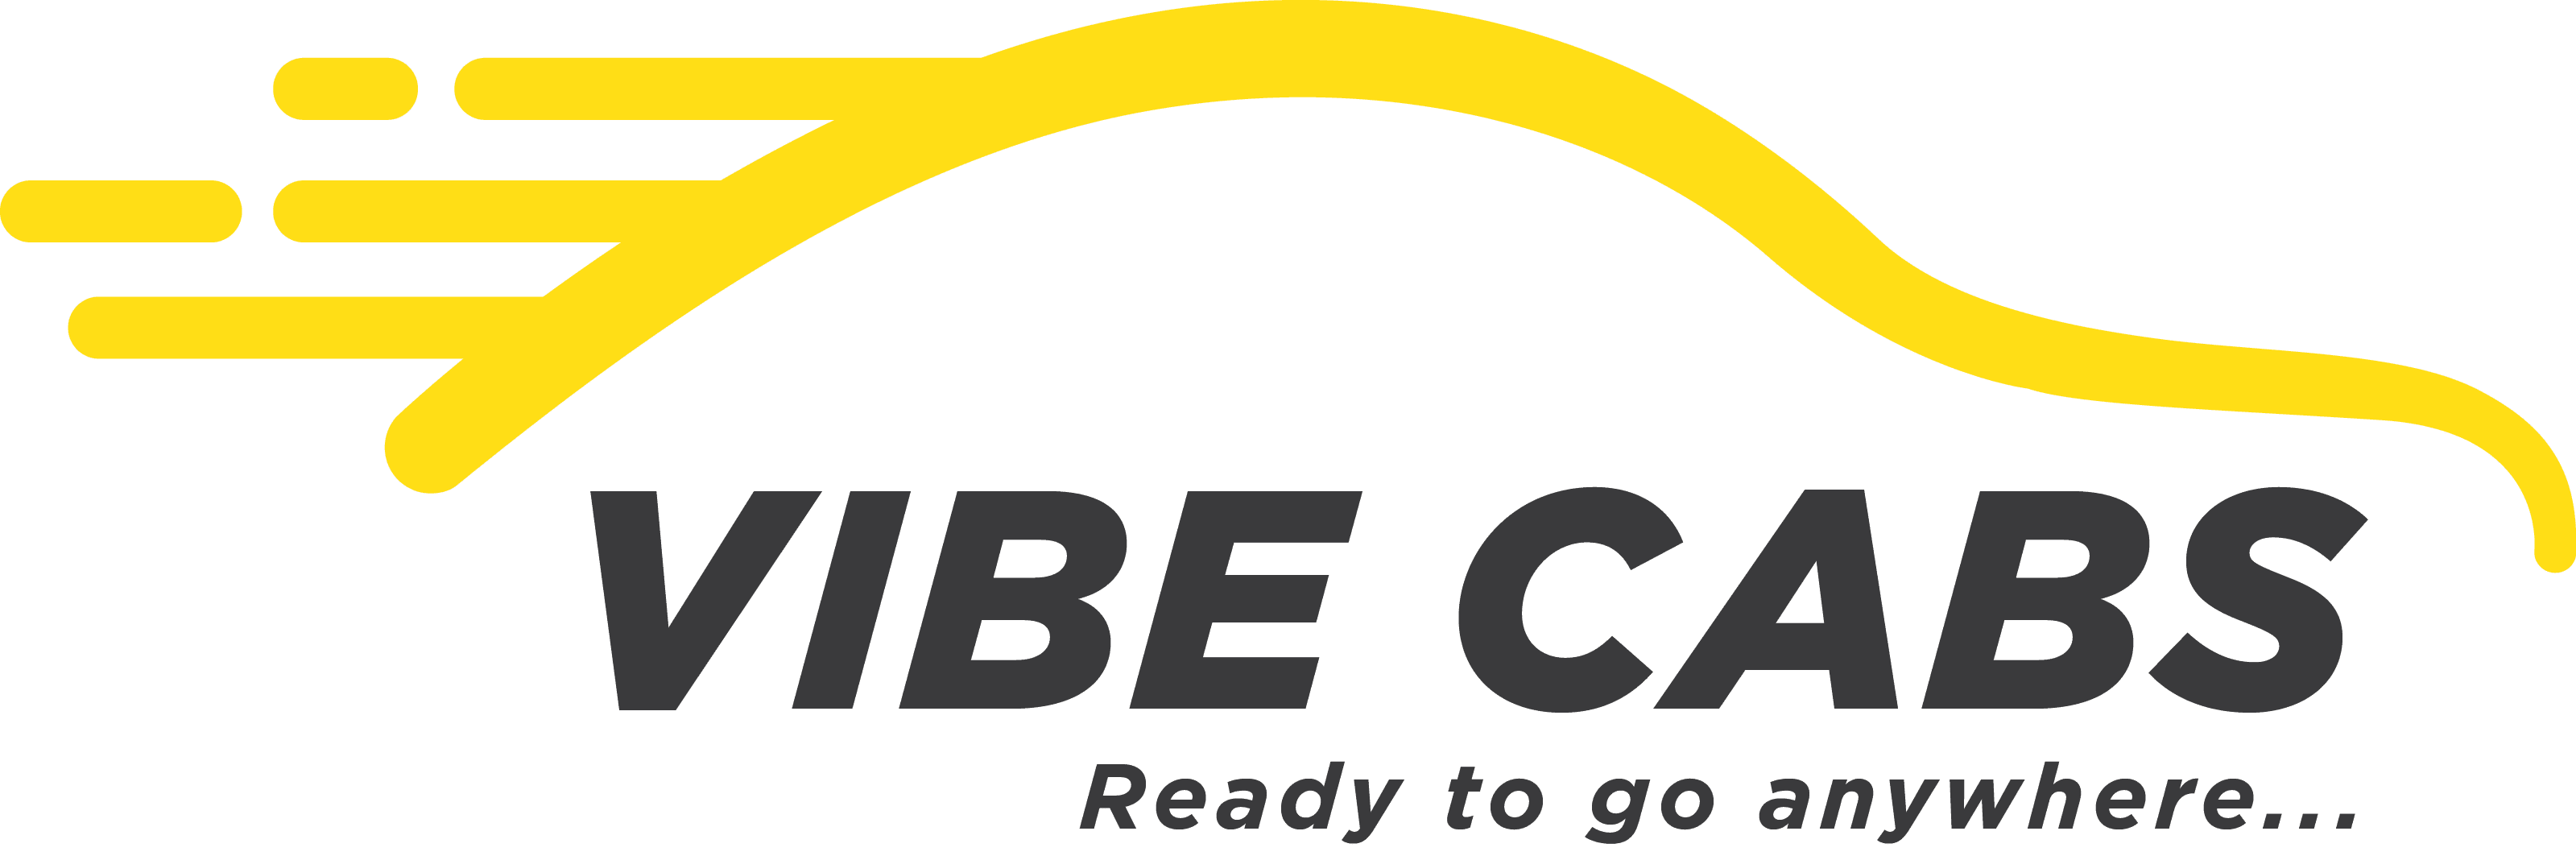 Vibecabs